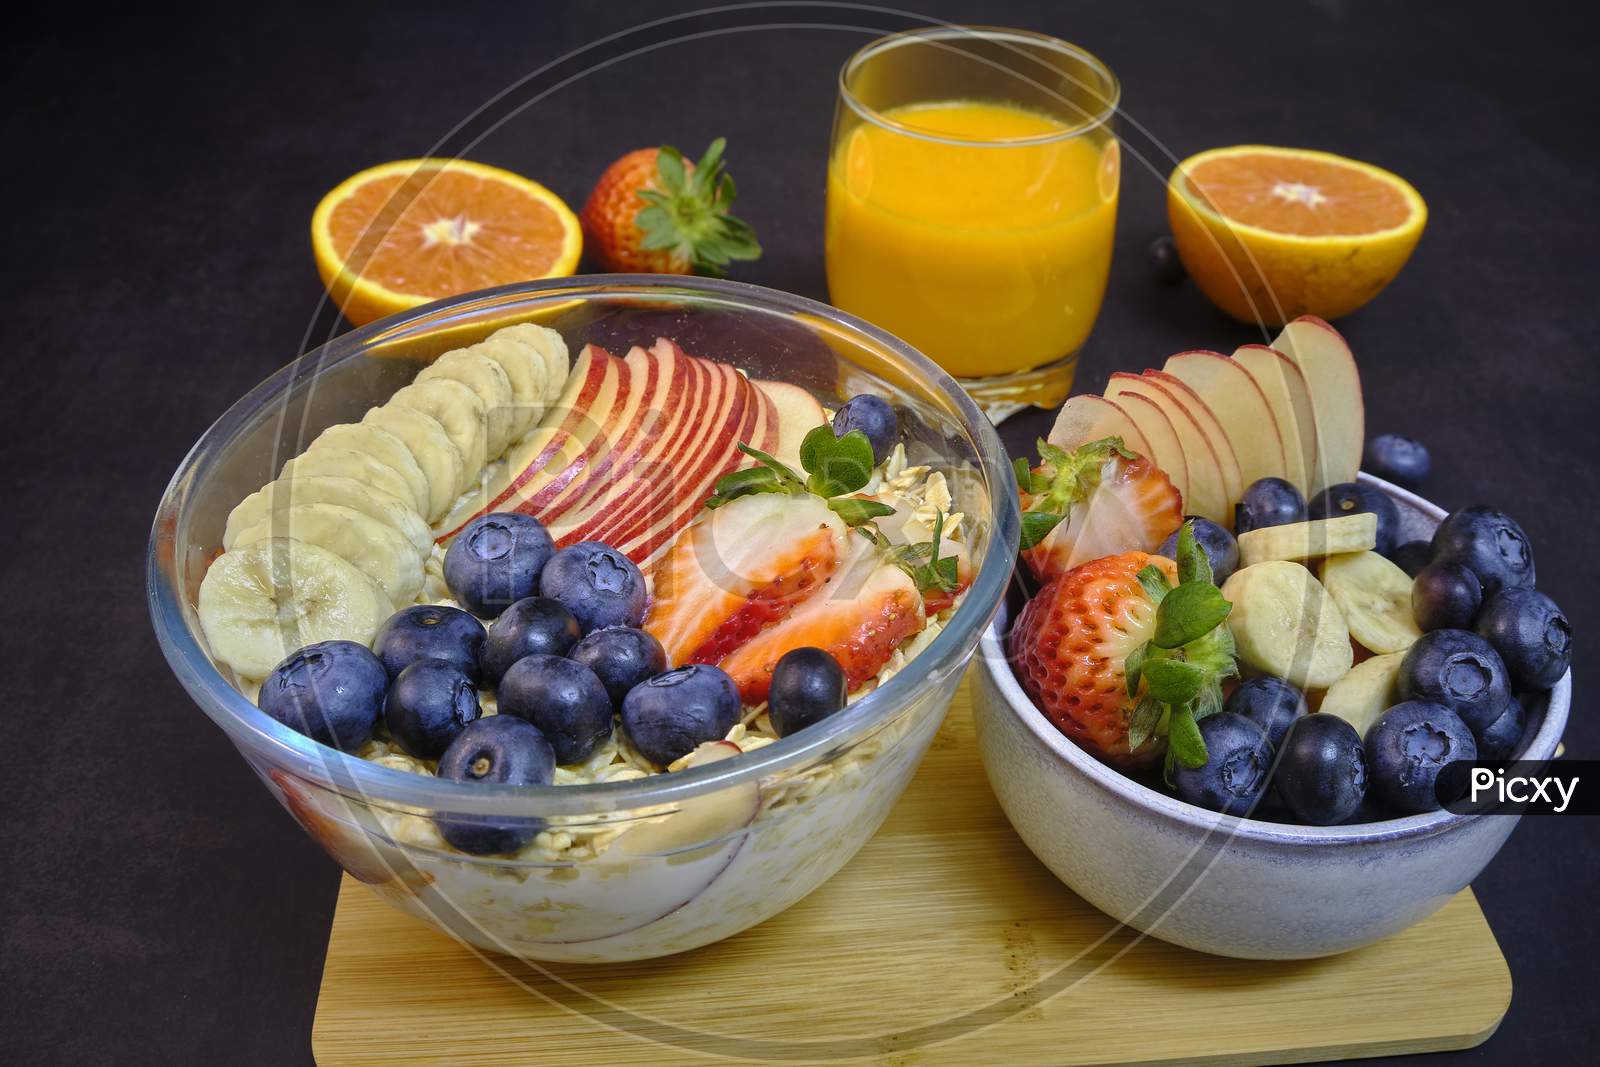 Healthy Breakfast With Fresh Fruits And Juice. Bowl Of colorful Fruits And Oats.